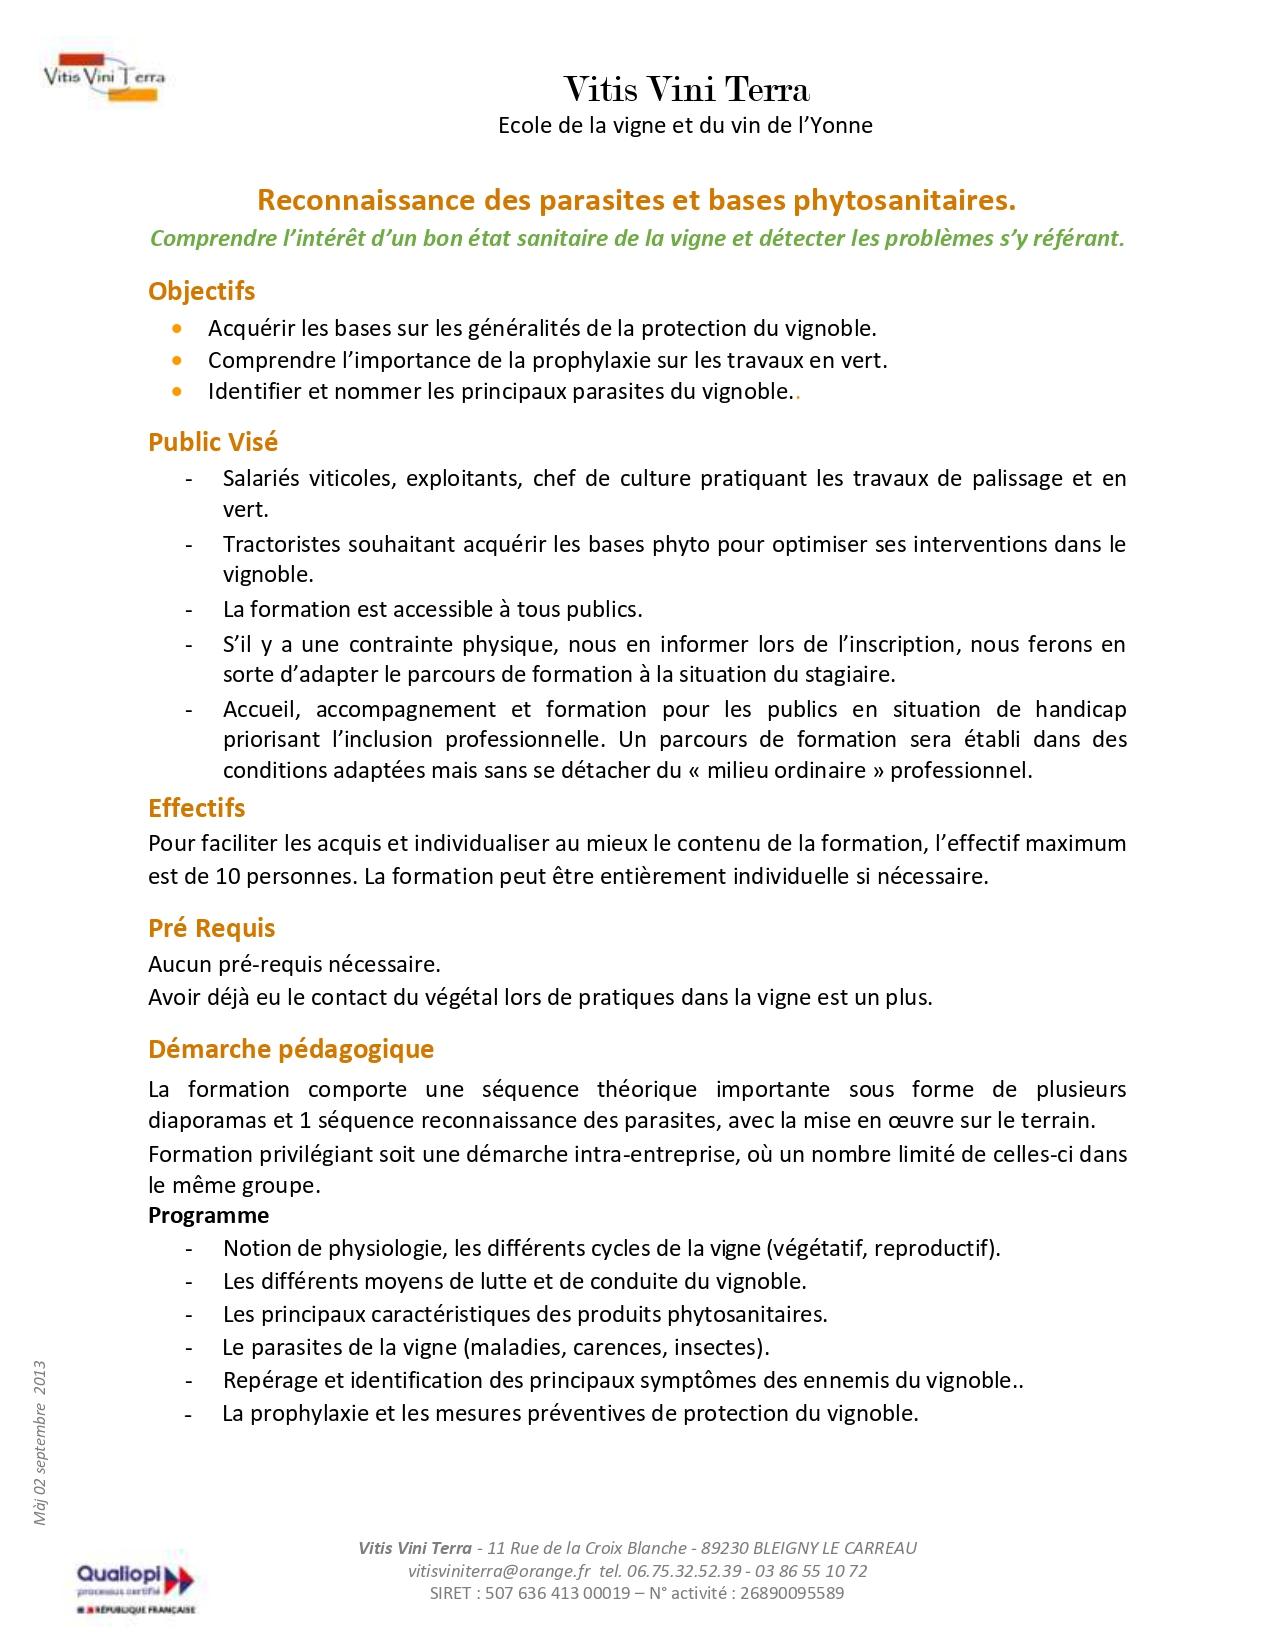 Fiche formation phyto page 0001